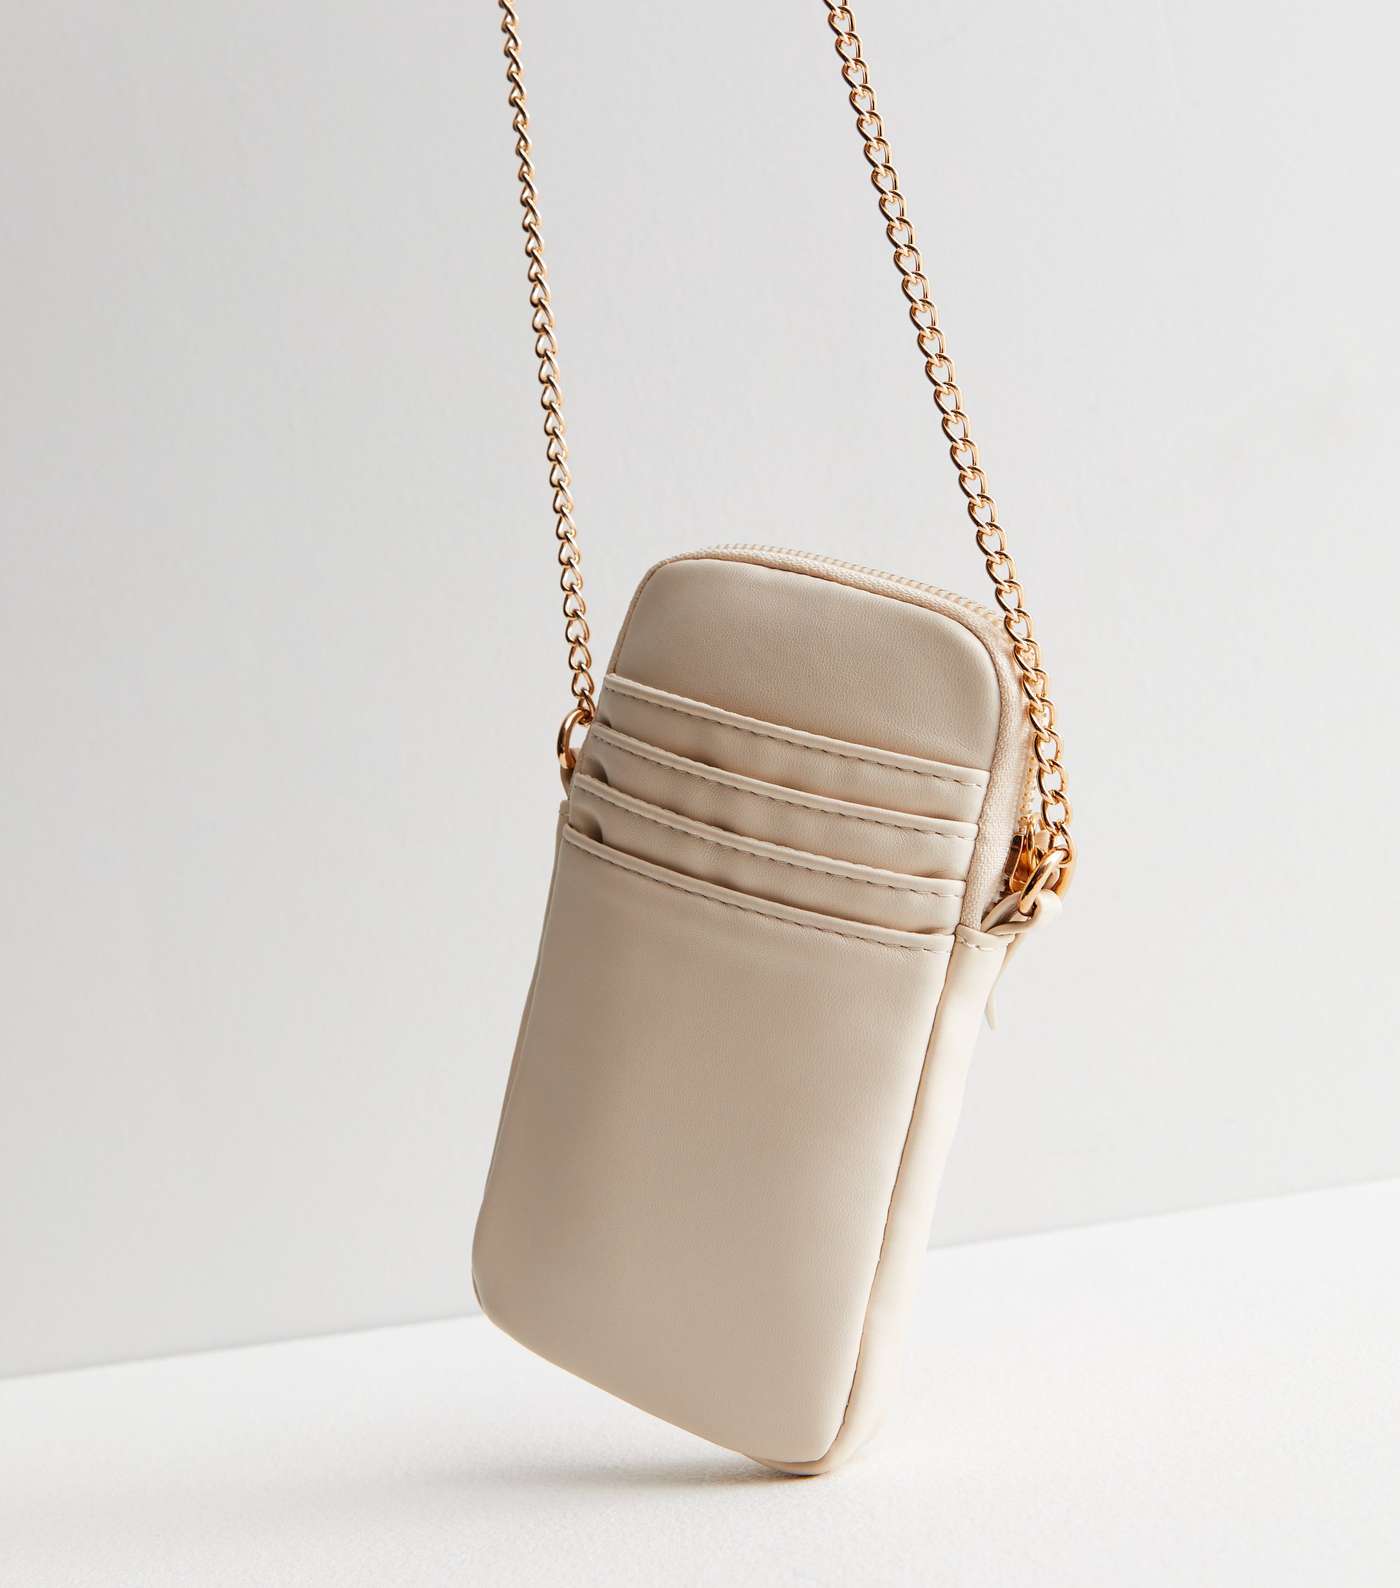 Cream Quilted Leather-Look Cross Body Phone Bag Image 3